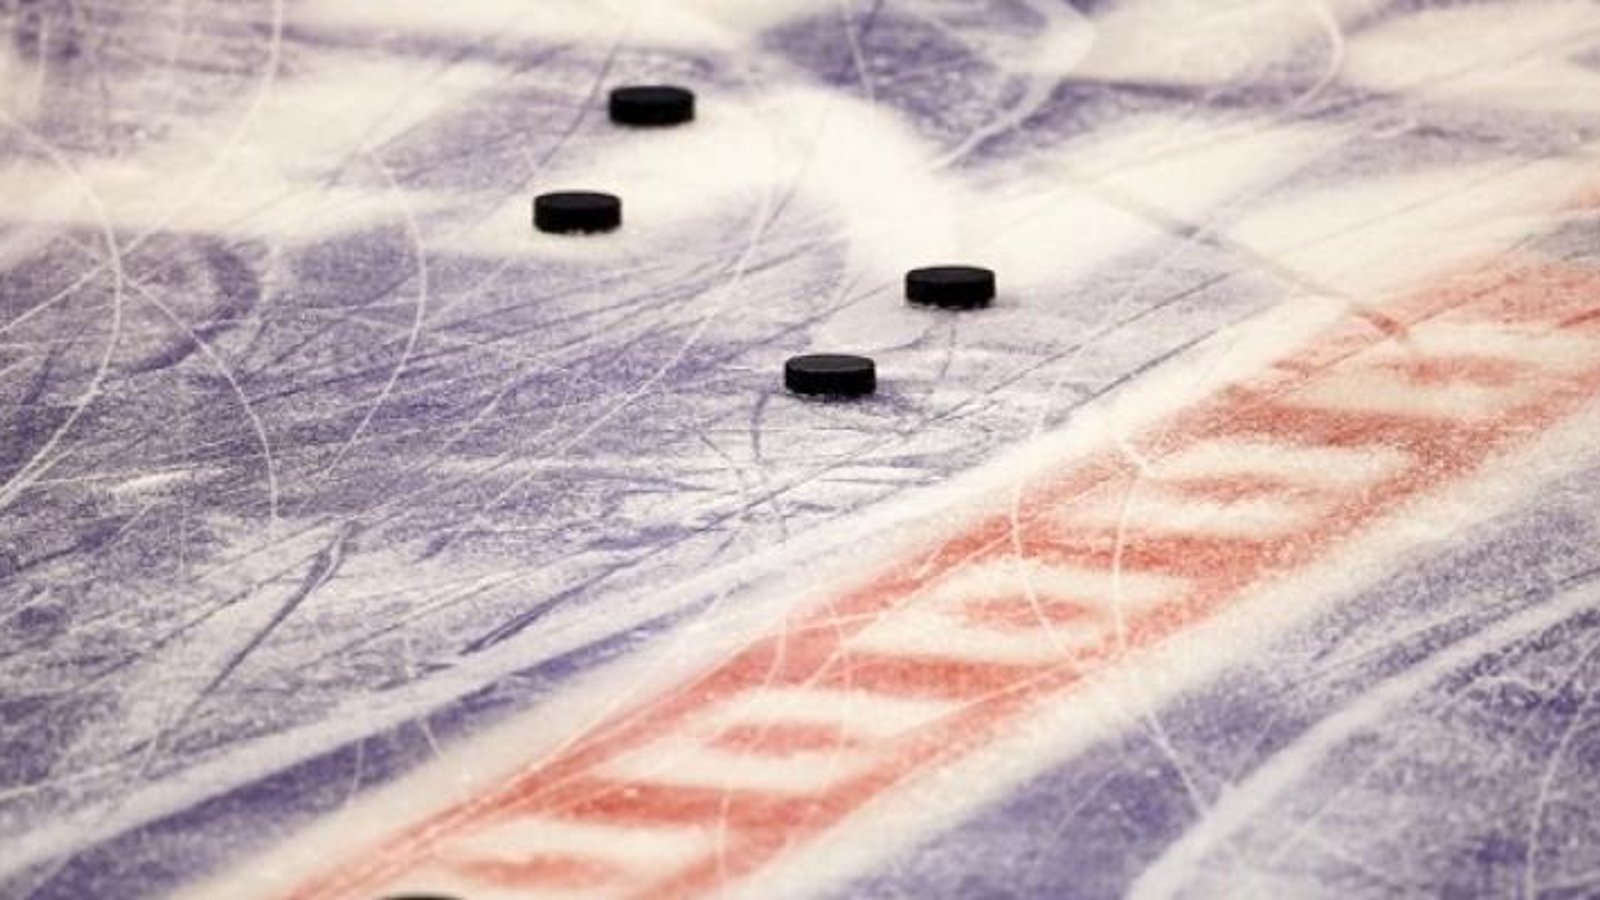 Report: Allegations of sexual assault levied against 10 players.